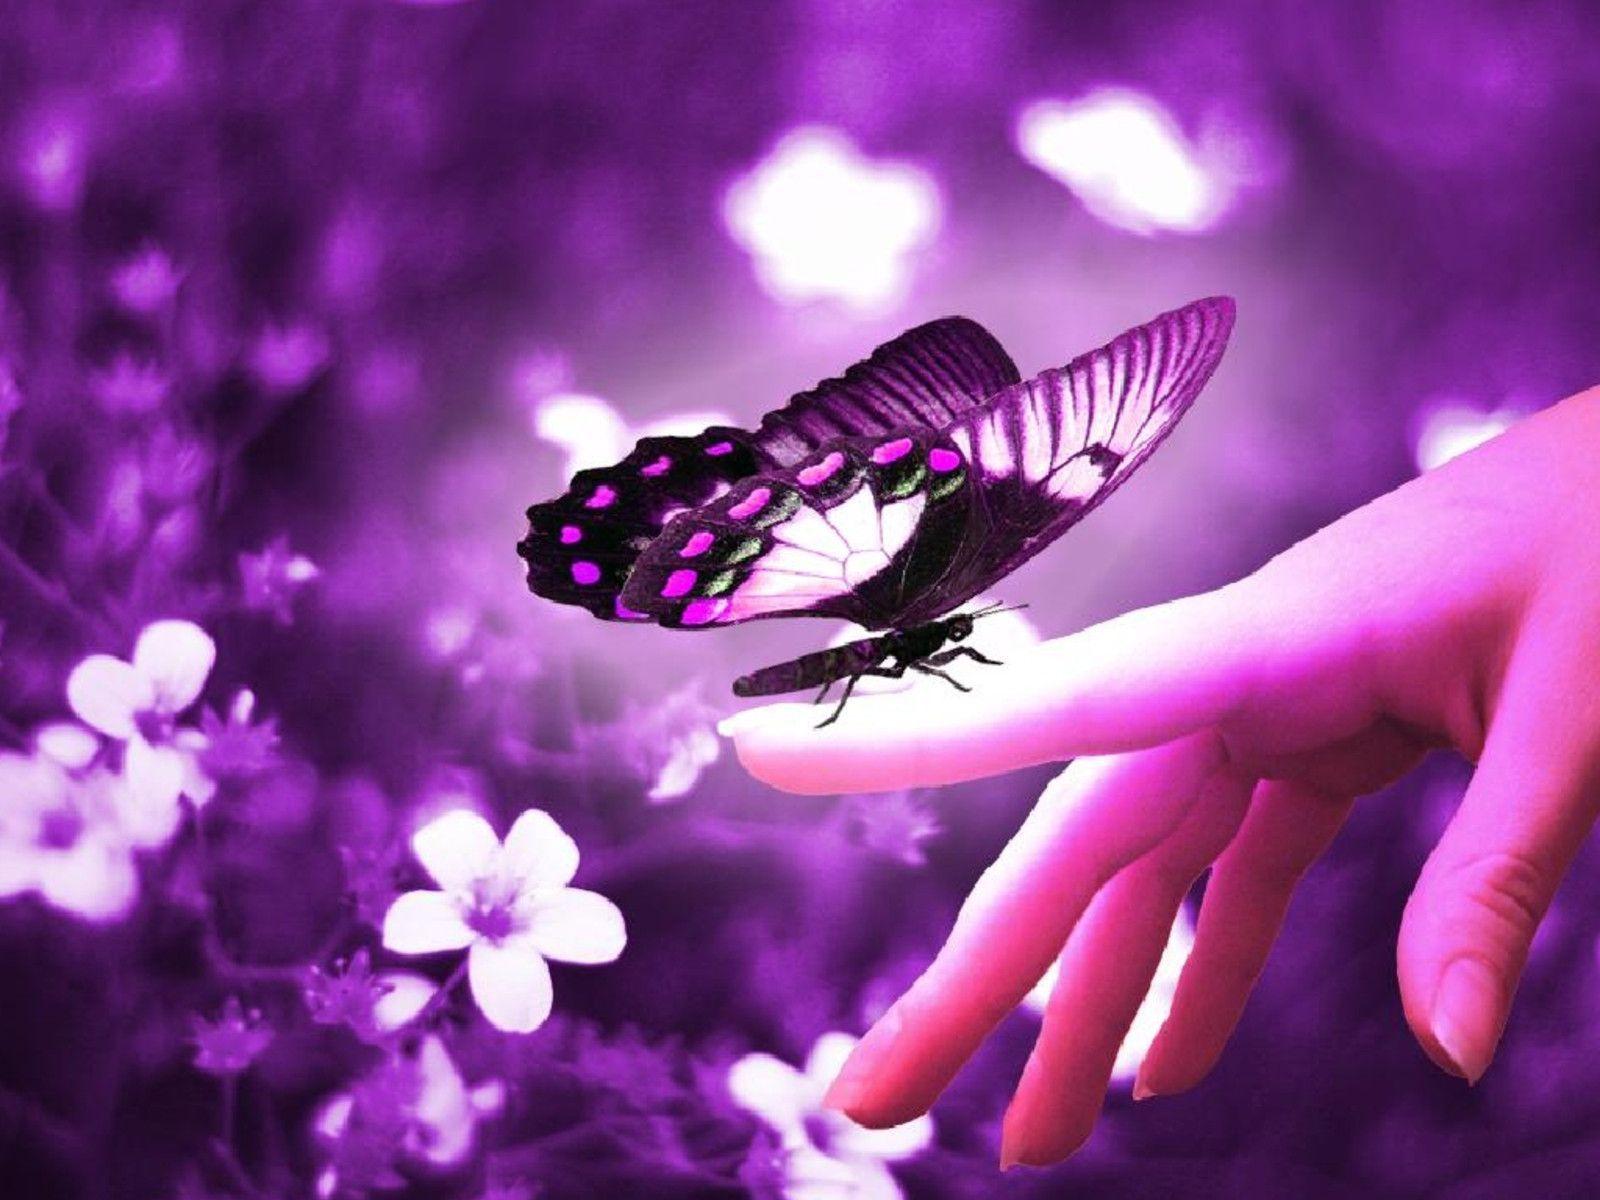 Animated Butterfly Wallpapers